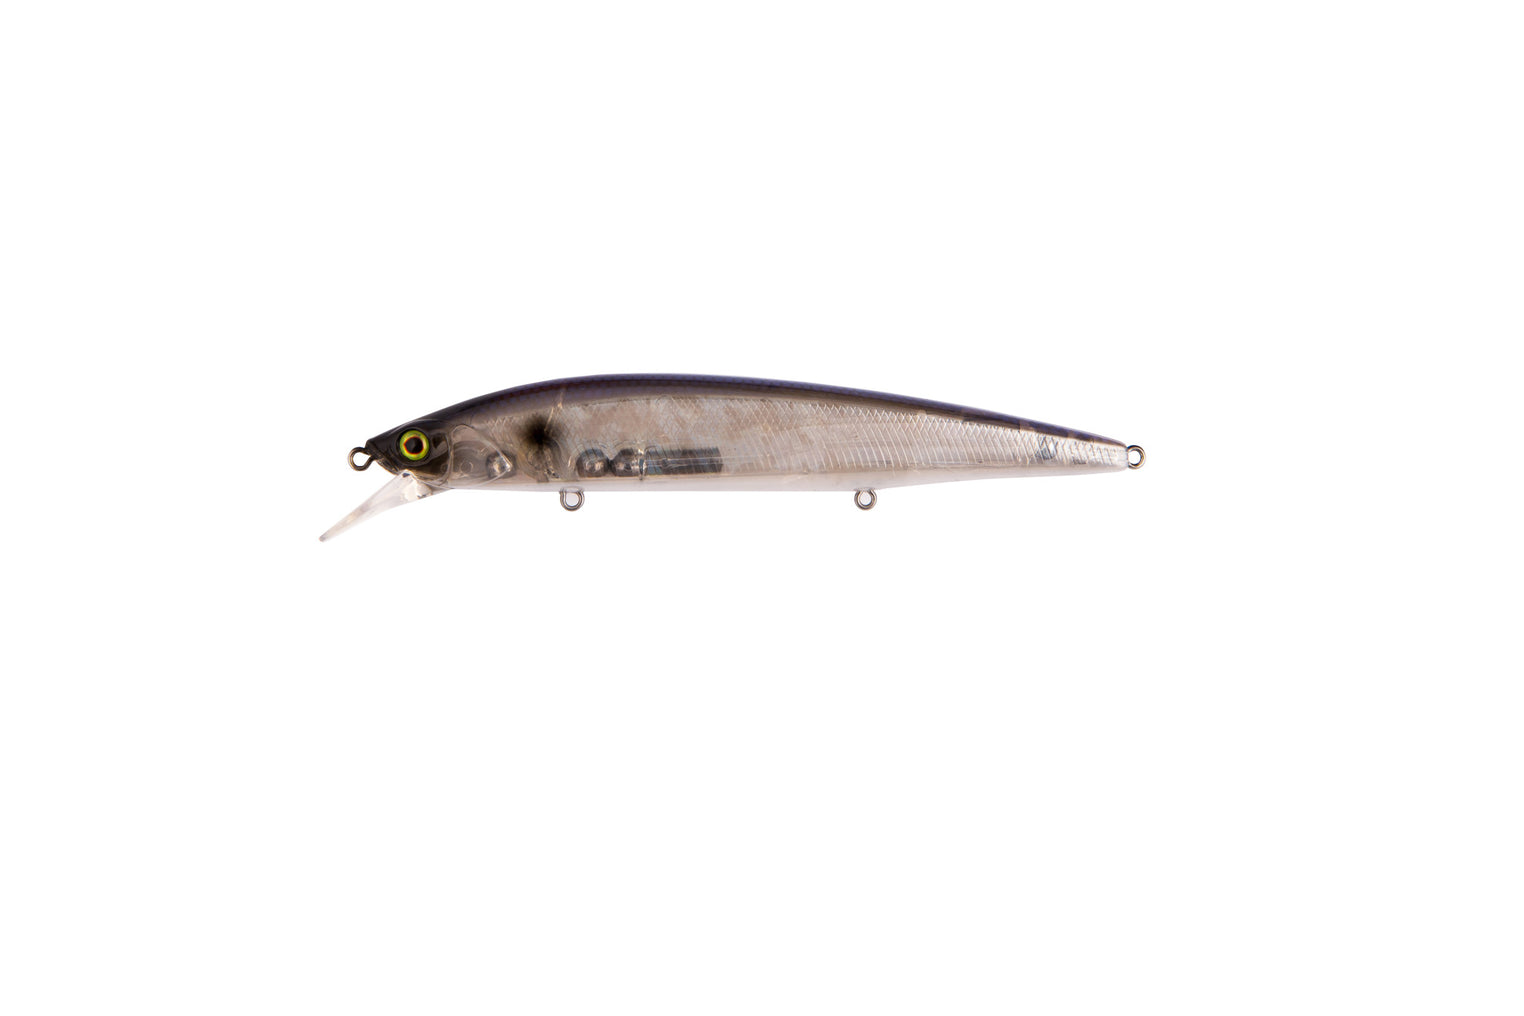 FREE FISHER Unpainted Fishing Lures,15pcs Lure Blanks Large Minnow